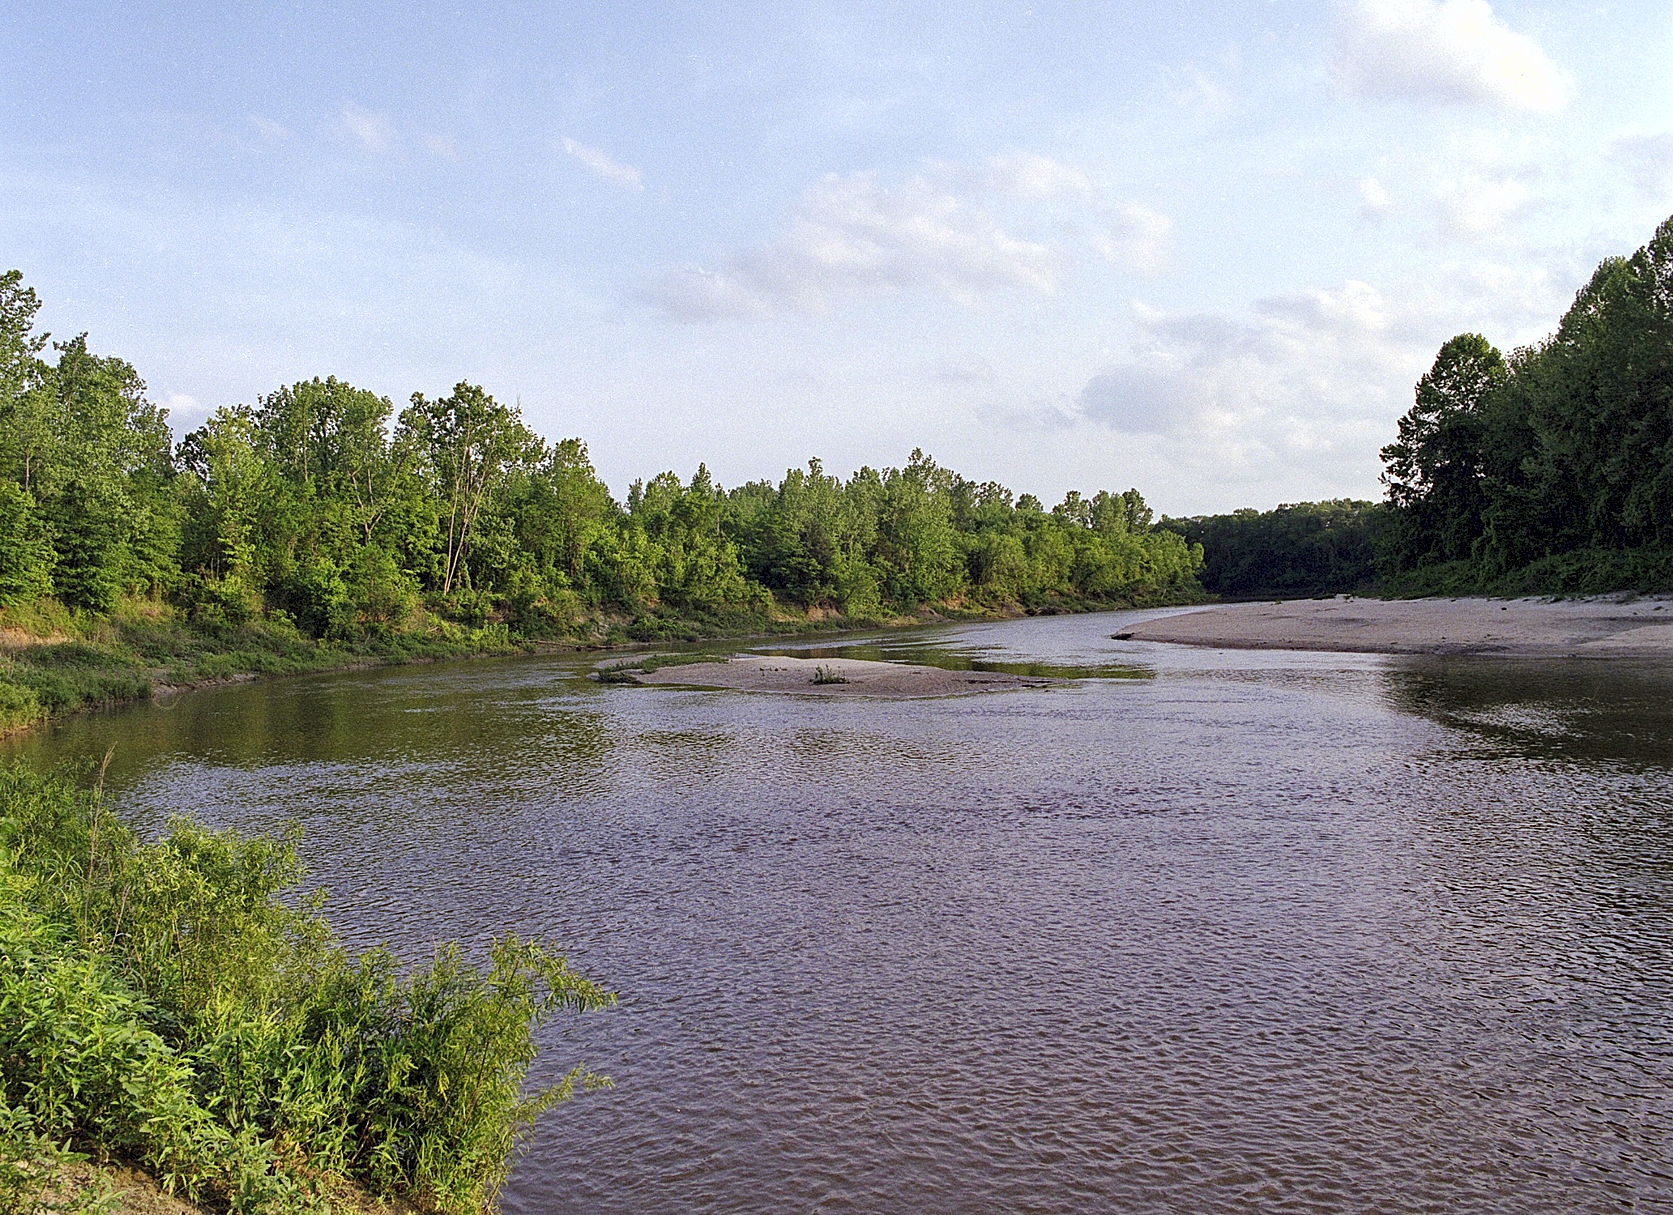  Town Creek in Monroe County, Mississippi, looking downstream from opposite Peacely Ferry Road. &nbsp;Captured on Fujifilm Pro 400H roll film using a Pentax 645A medium format camera and Pentax 45mm f/2.8 lens. 